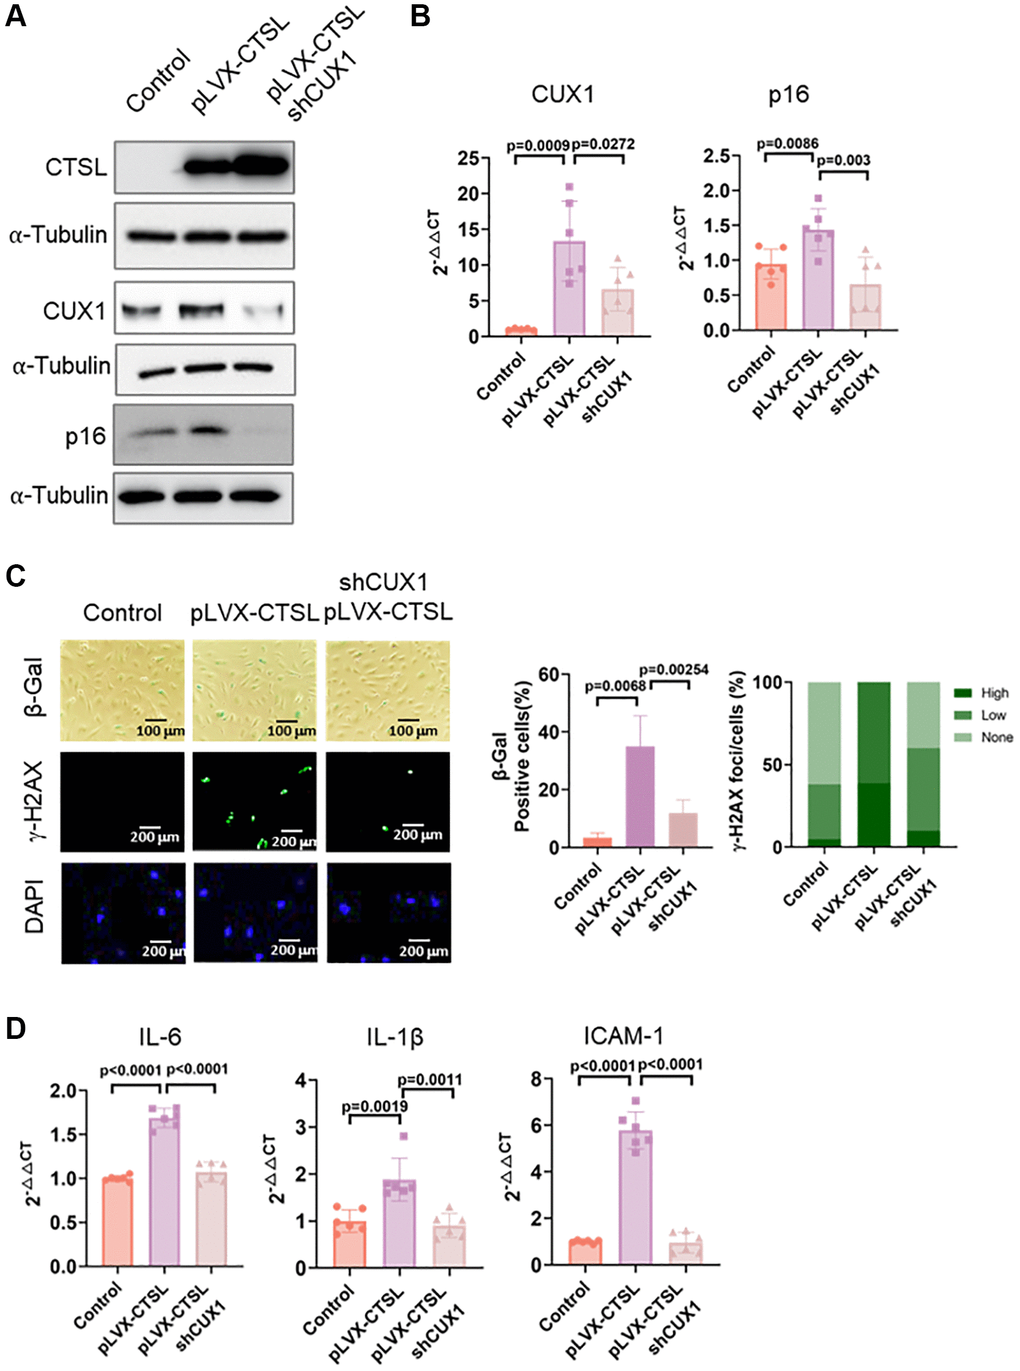 CTSL is an upstream regulator of CUX1 and p16INK4a, inducing replicative senescence. (A, B) Western blot and qPCR analyses showing that overexpression of CTSL (pLVX-CTSL) activates CUX1 and p16INK4a expression, and that shRNA-mediated CUX1 knockdown (shCUX1) reverses the increased expression of CUX1 and p16INK4a in CTSL-overexpressing (pLVX-CTSL) human ECs. (C, D) SA-β-gal and γ-H2AX staining and the expression of SASP genes IL6, IL-1β and ICAM-1 verify that overexpression of CTSL (pLVX-CTSL) induces cellular senescence, and that shRNA-mediated CUX1 knockdown (shCUX1) reverses the increased senescence in the CTSL-overexpressing (pLVX-CTSL) human ECs. Quantitative plots for both β-gal+ cells (%) in SA-β-gal staining and γ-H2AX foci/cells (%) with γ-H2AX staining were shown on the right side of the panel C. DAPI staining visualizes the presence of nuclei as a control for the cells in this analysis. Data for Western blots represent three biologically independent samples (n = 3). Data for qPCR represent a combination of three (n = 3) biologically independent experiments. Data for both SA-β-gal staining and γ-H2AX staining represent three biologically independent samples (n = 3).